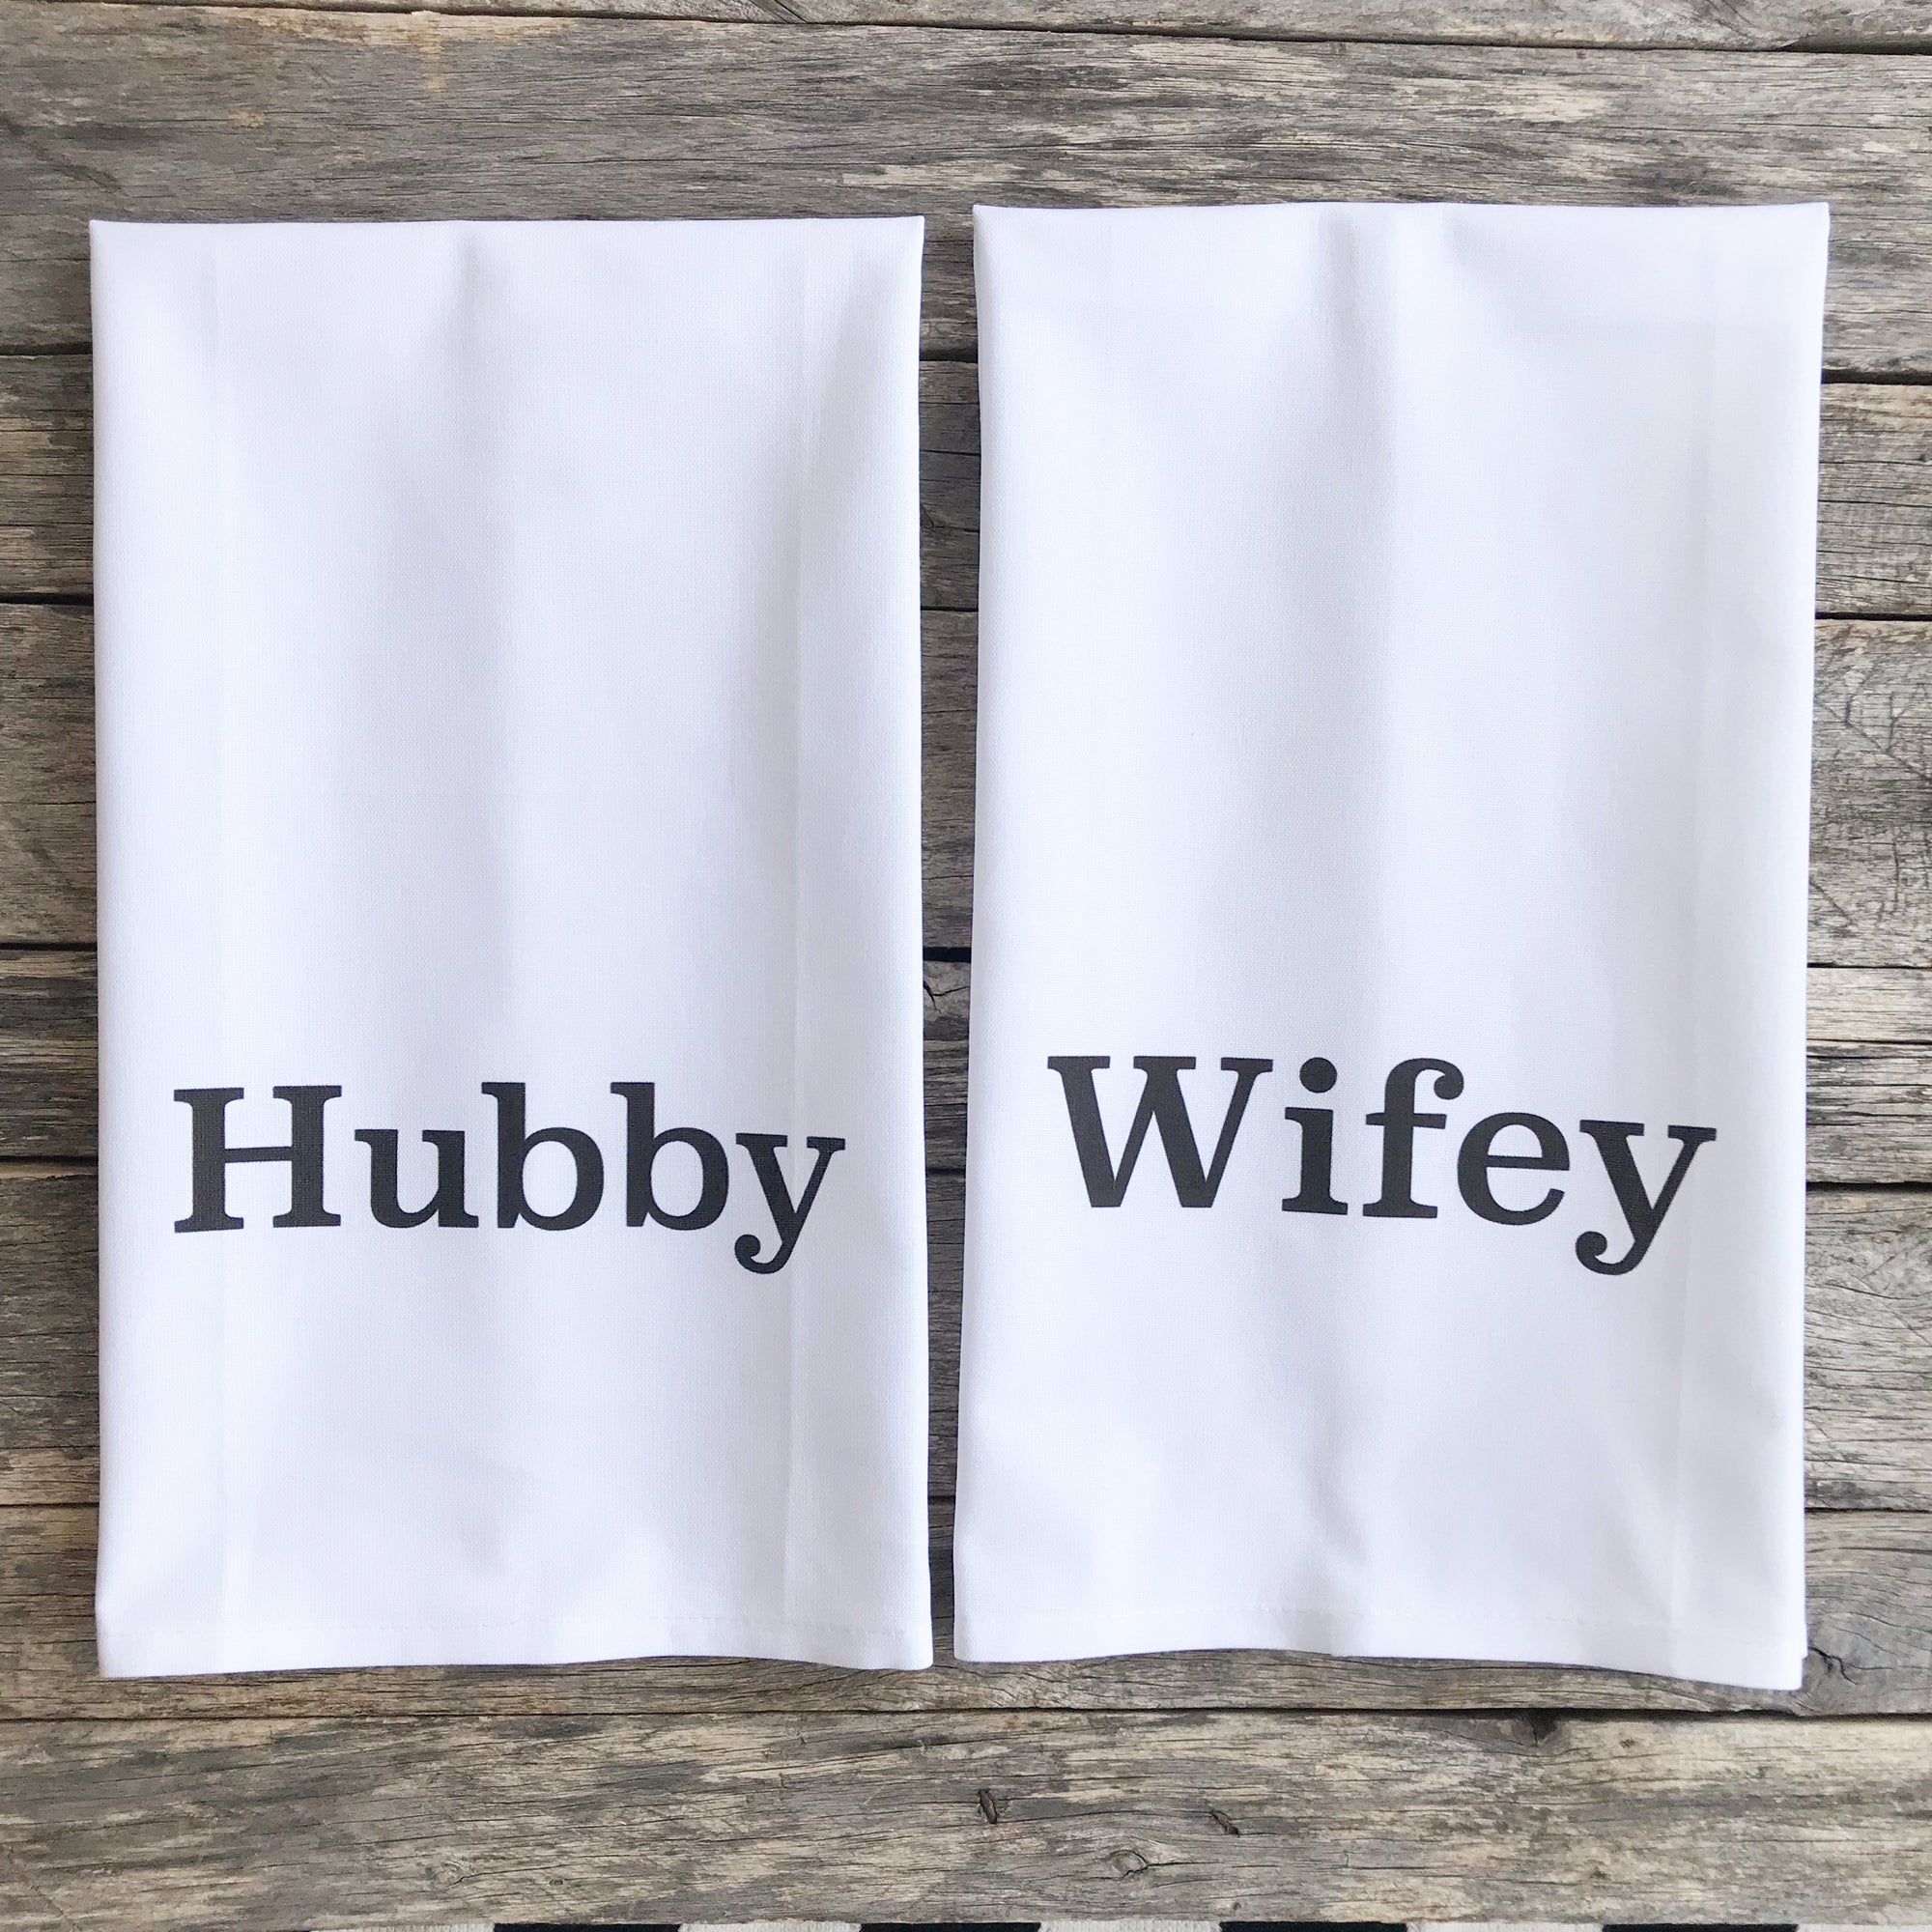 Hubby & Wifey Tea Towels - Linen and Ivory